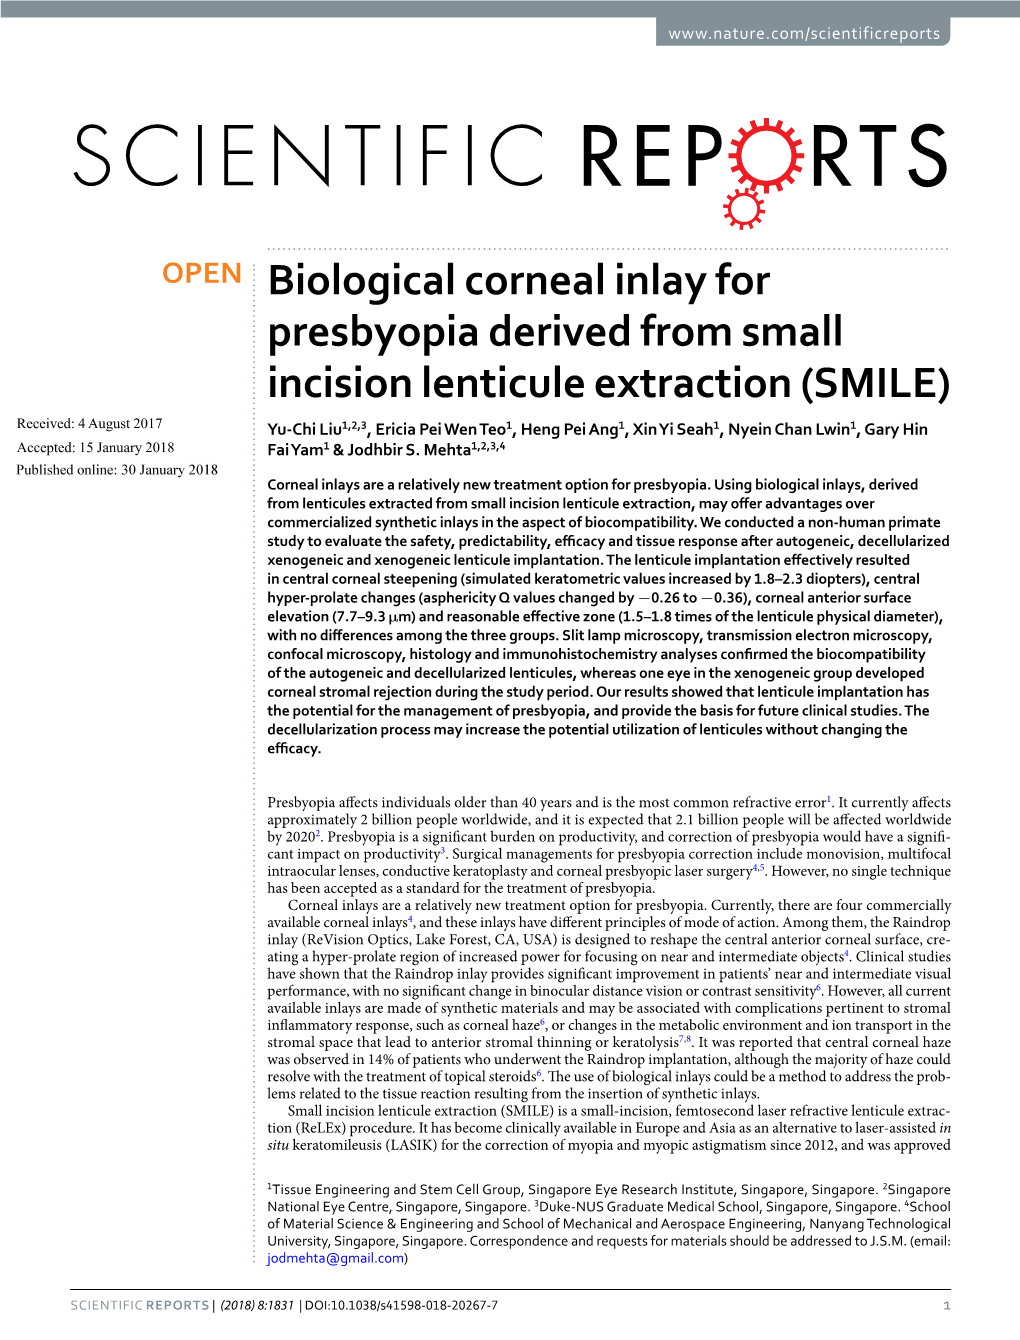 Biological Corneal Inlay for Presbyopia Derived from Small Incision